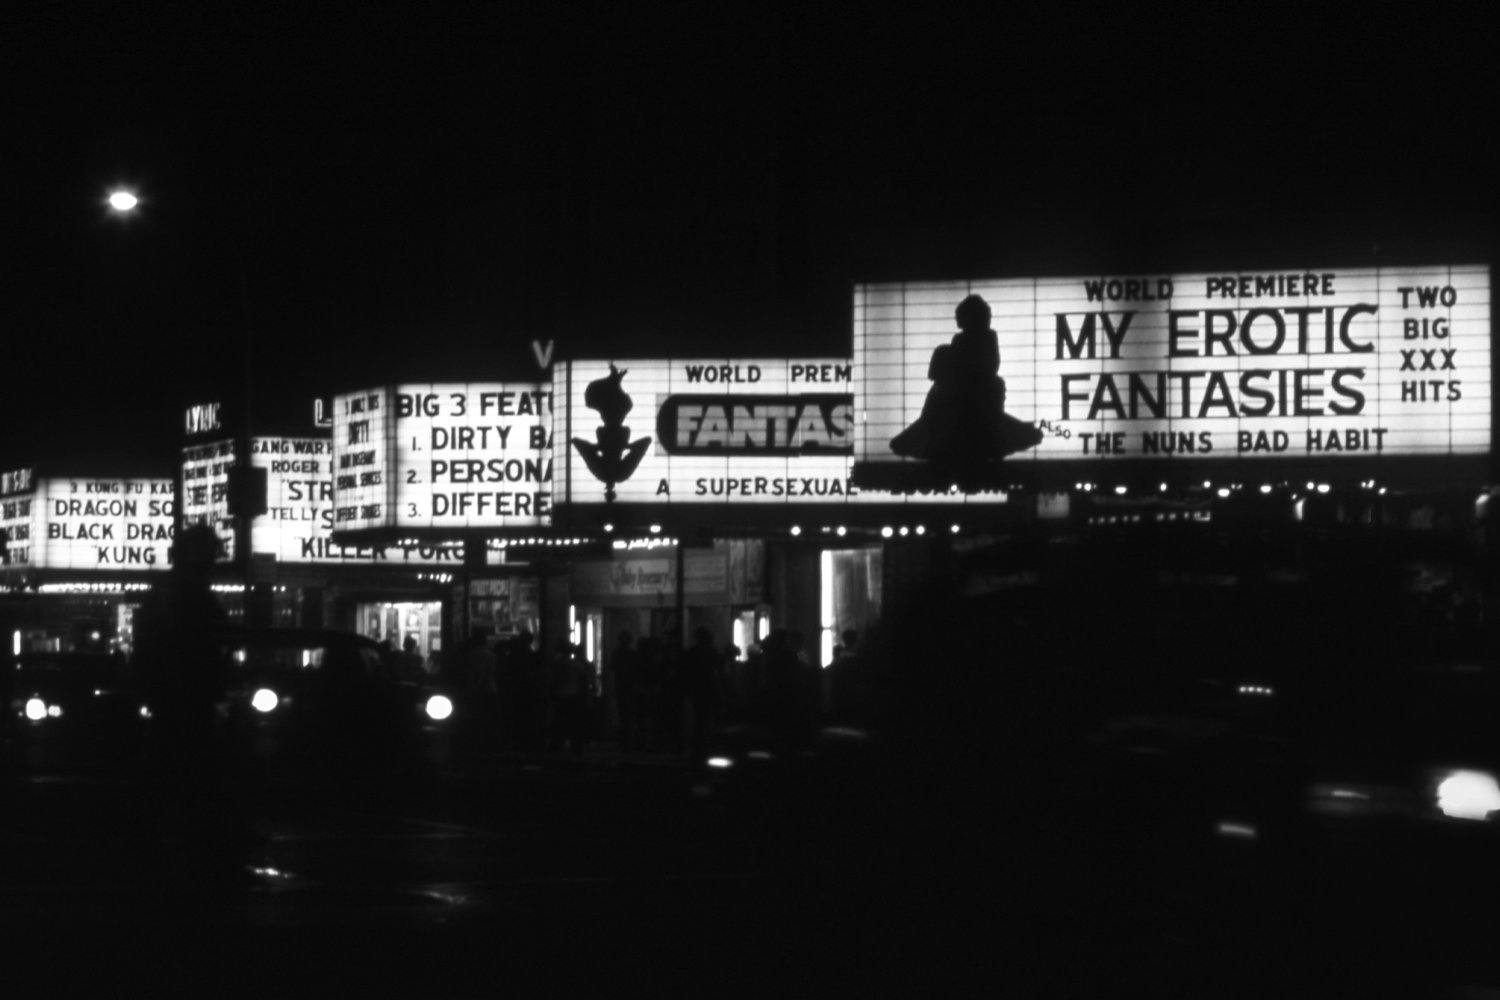 NEW YORK - 1976: A view of the marquees of cinemas on West 42nd Street including the RialtoII, the Rialto, the Victory Theatre, the Lyric Theatre and the Times Square Theater in 1976 in New York City, New York. 